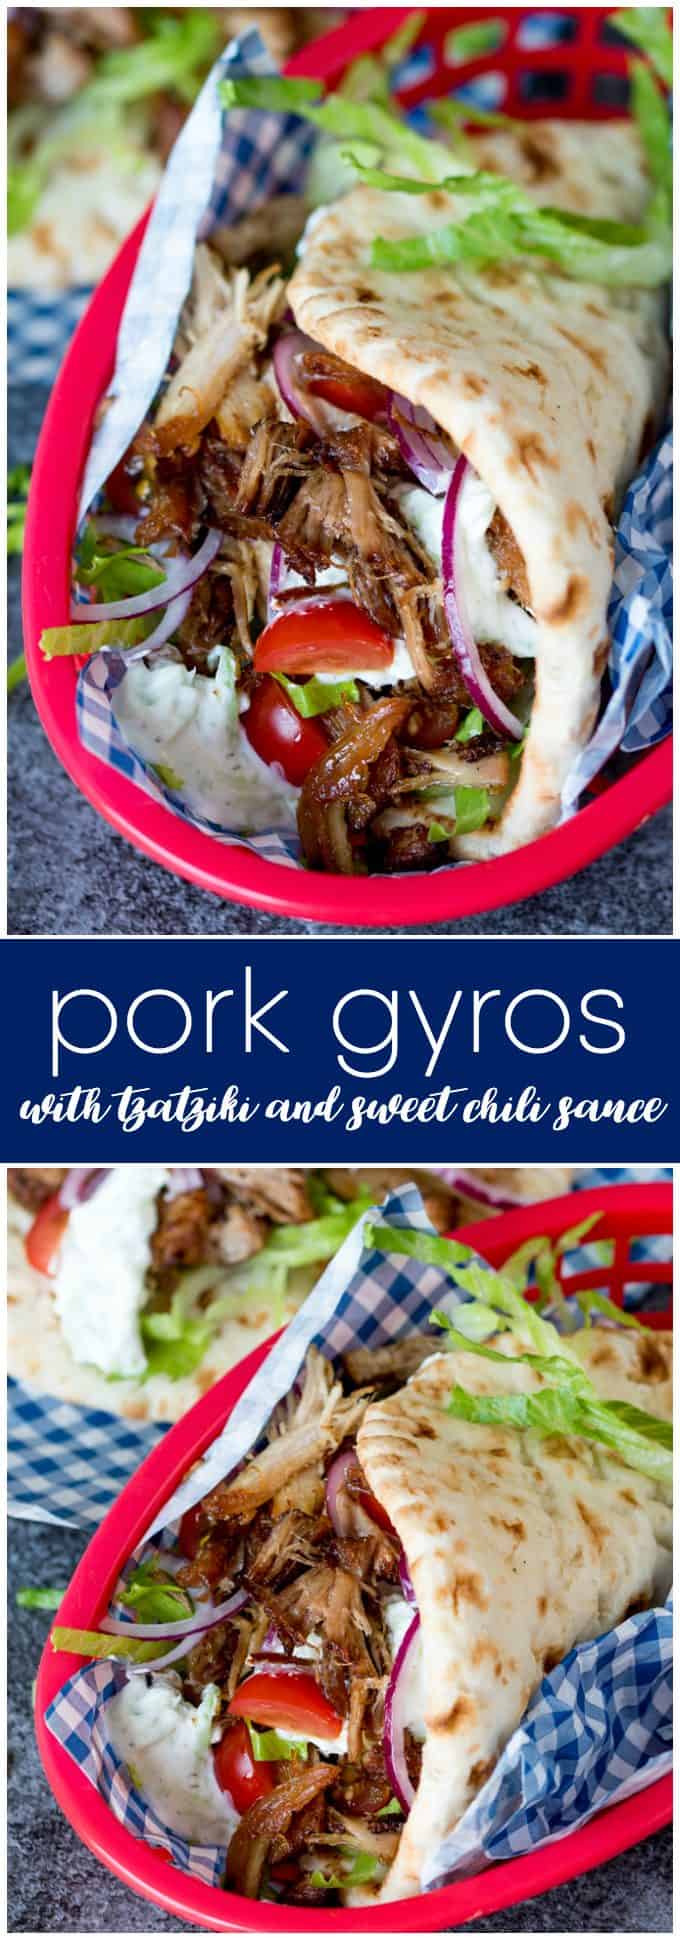 Pork Gyros with Tzatziki and Sweet Chili Sauce - Calling all carnivores! These pulled pork gyros are the perfect Greek night recipe with homemade sauces.